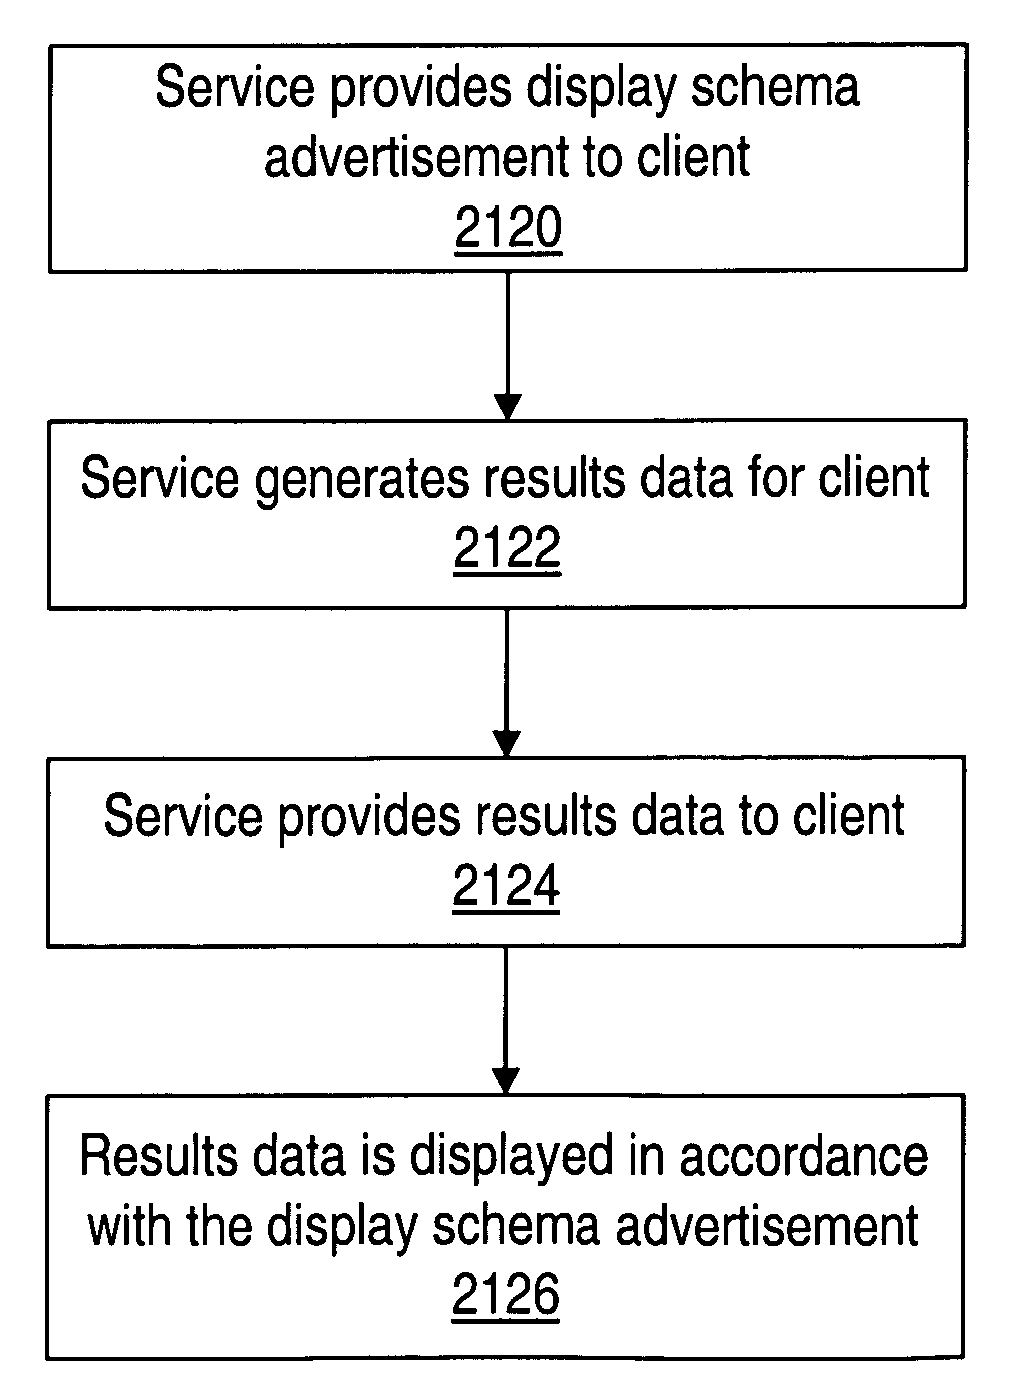 Dynamic displays in a distributed computing environment